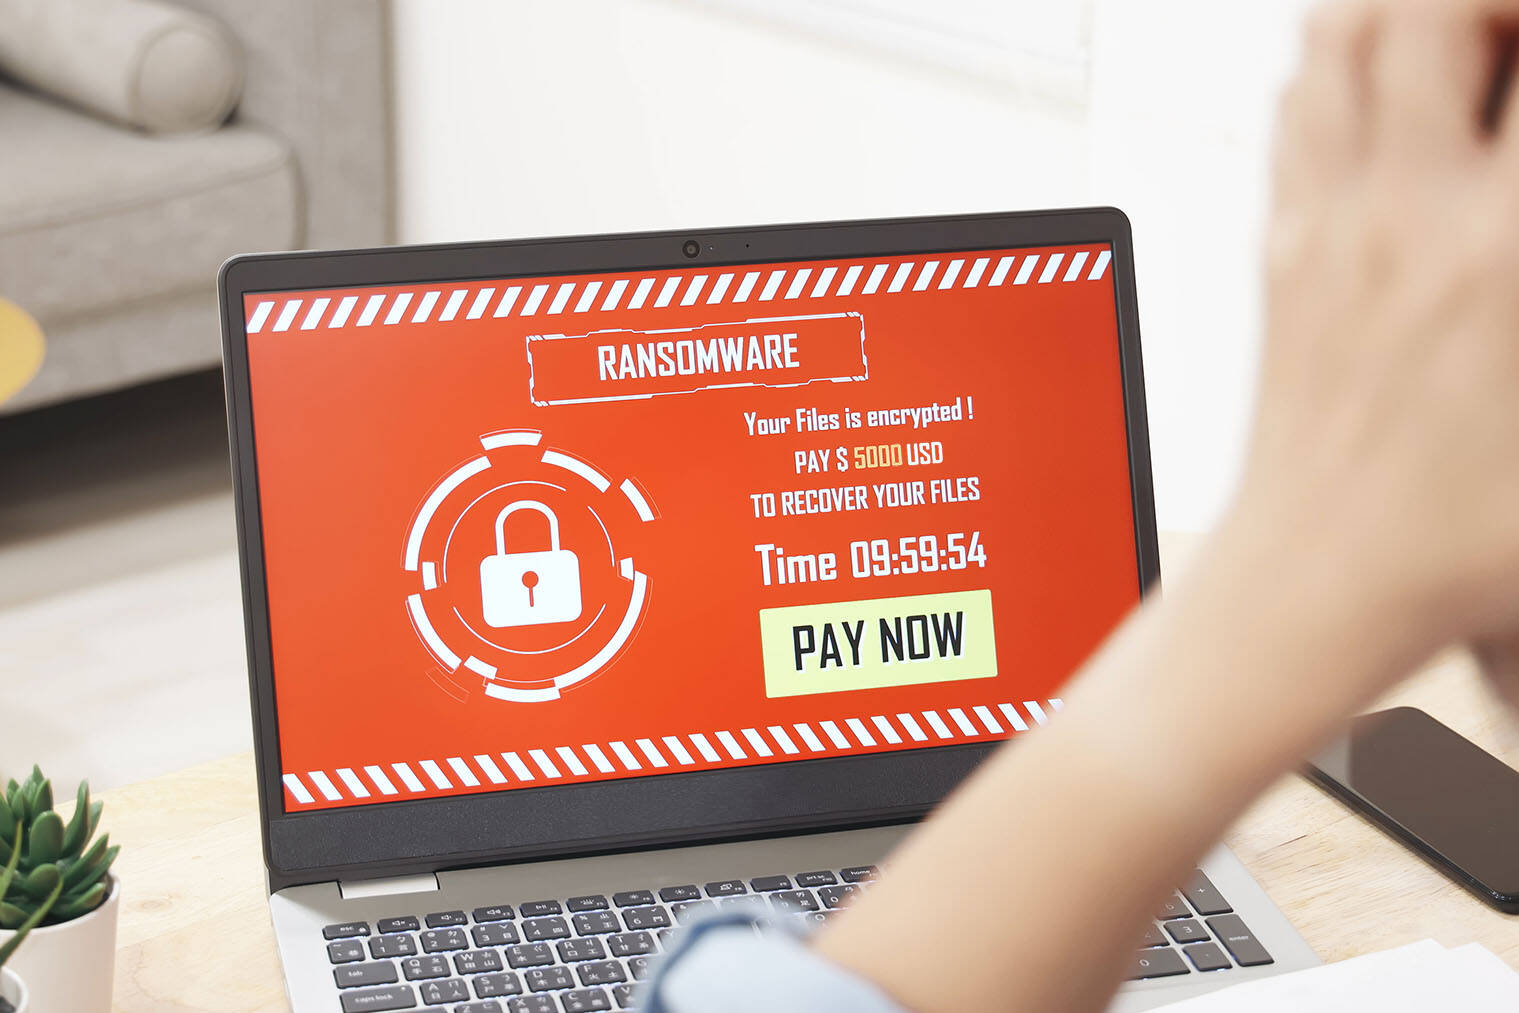 3things to prevent ransomware